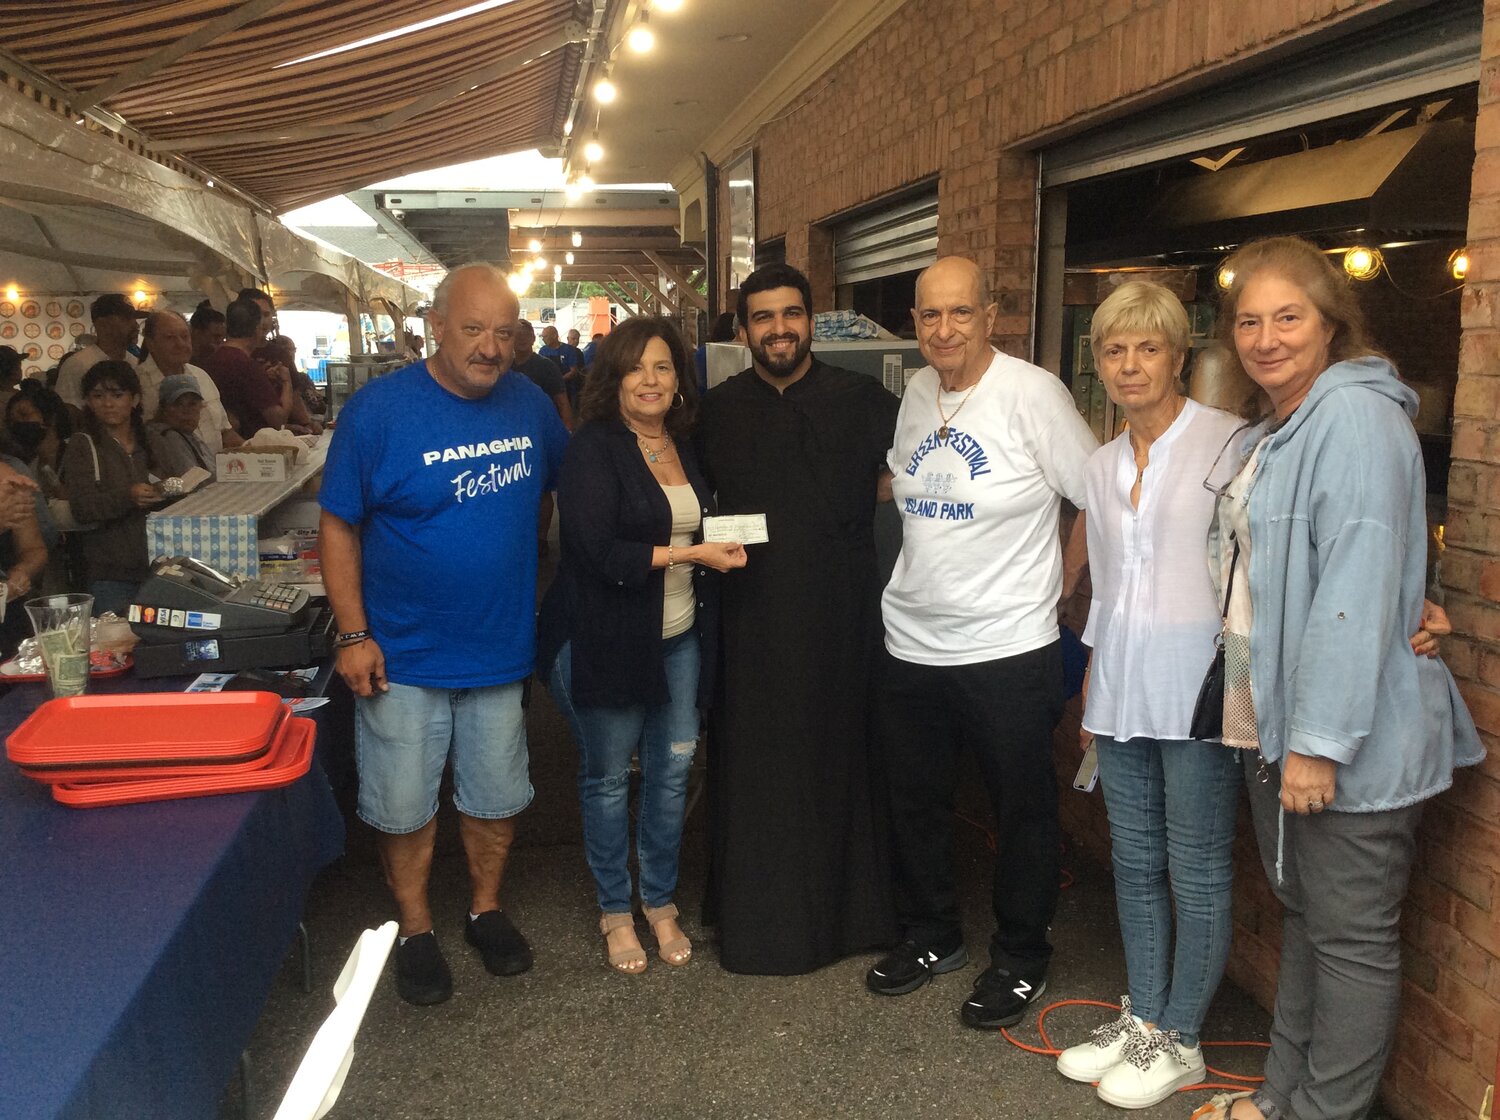 The Kythirian Association of New York made a donation to the Panaghia Church of Island Park